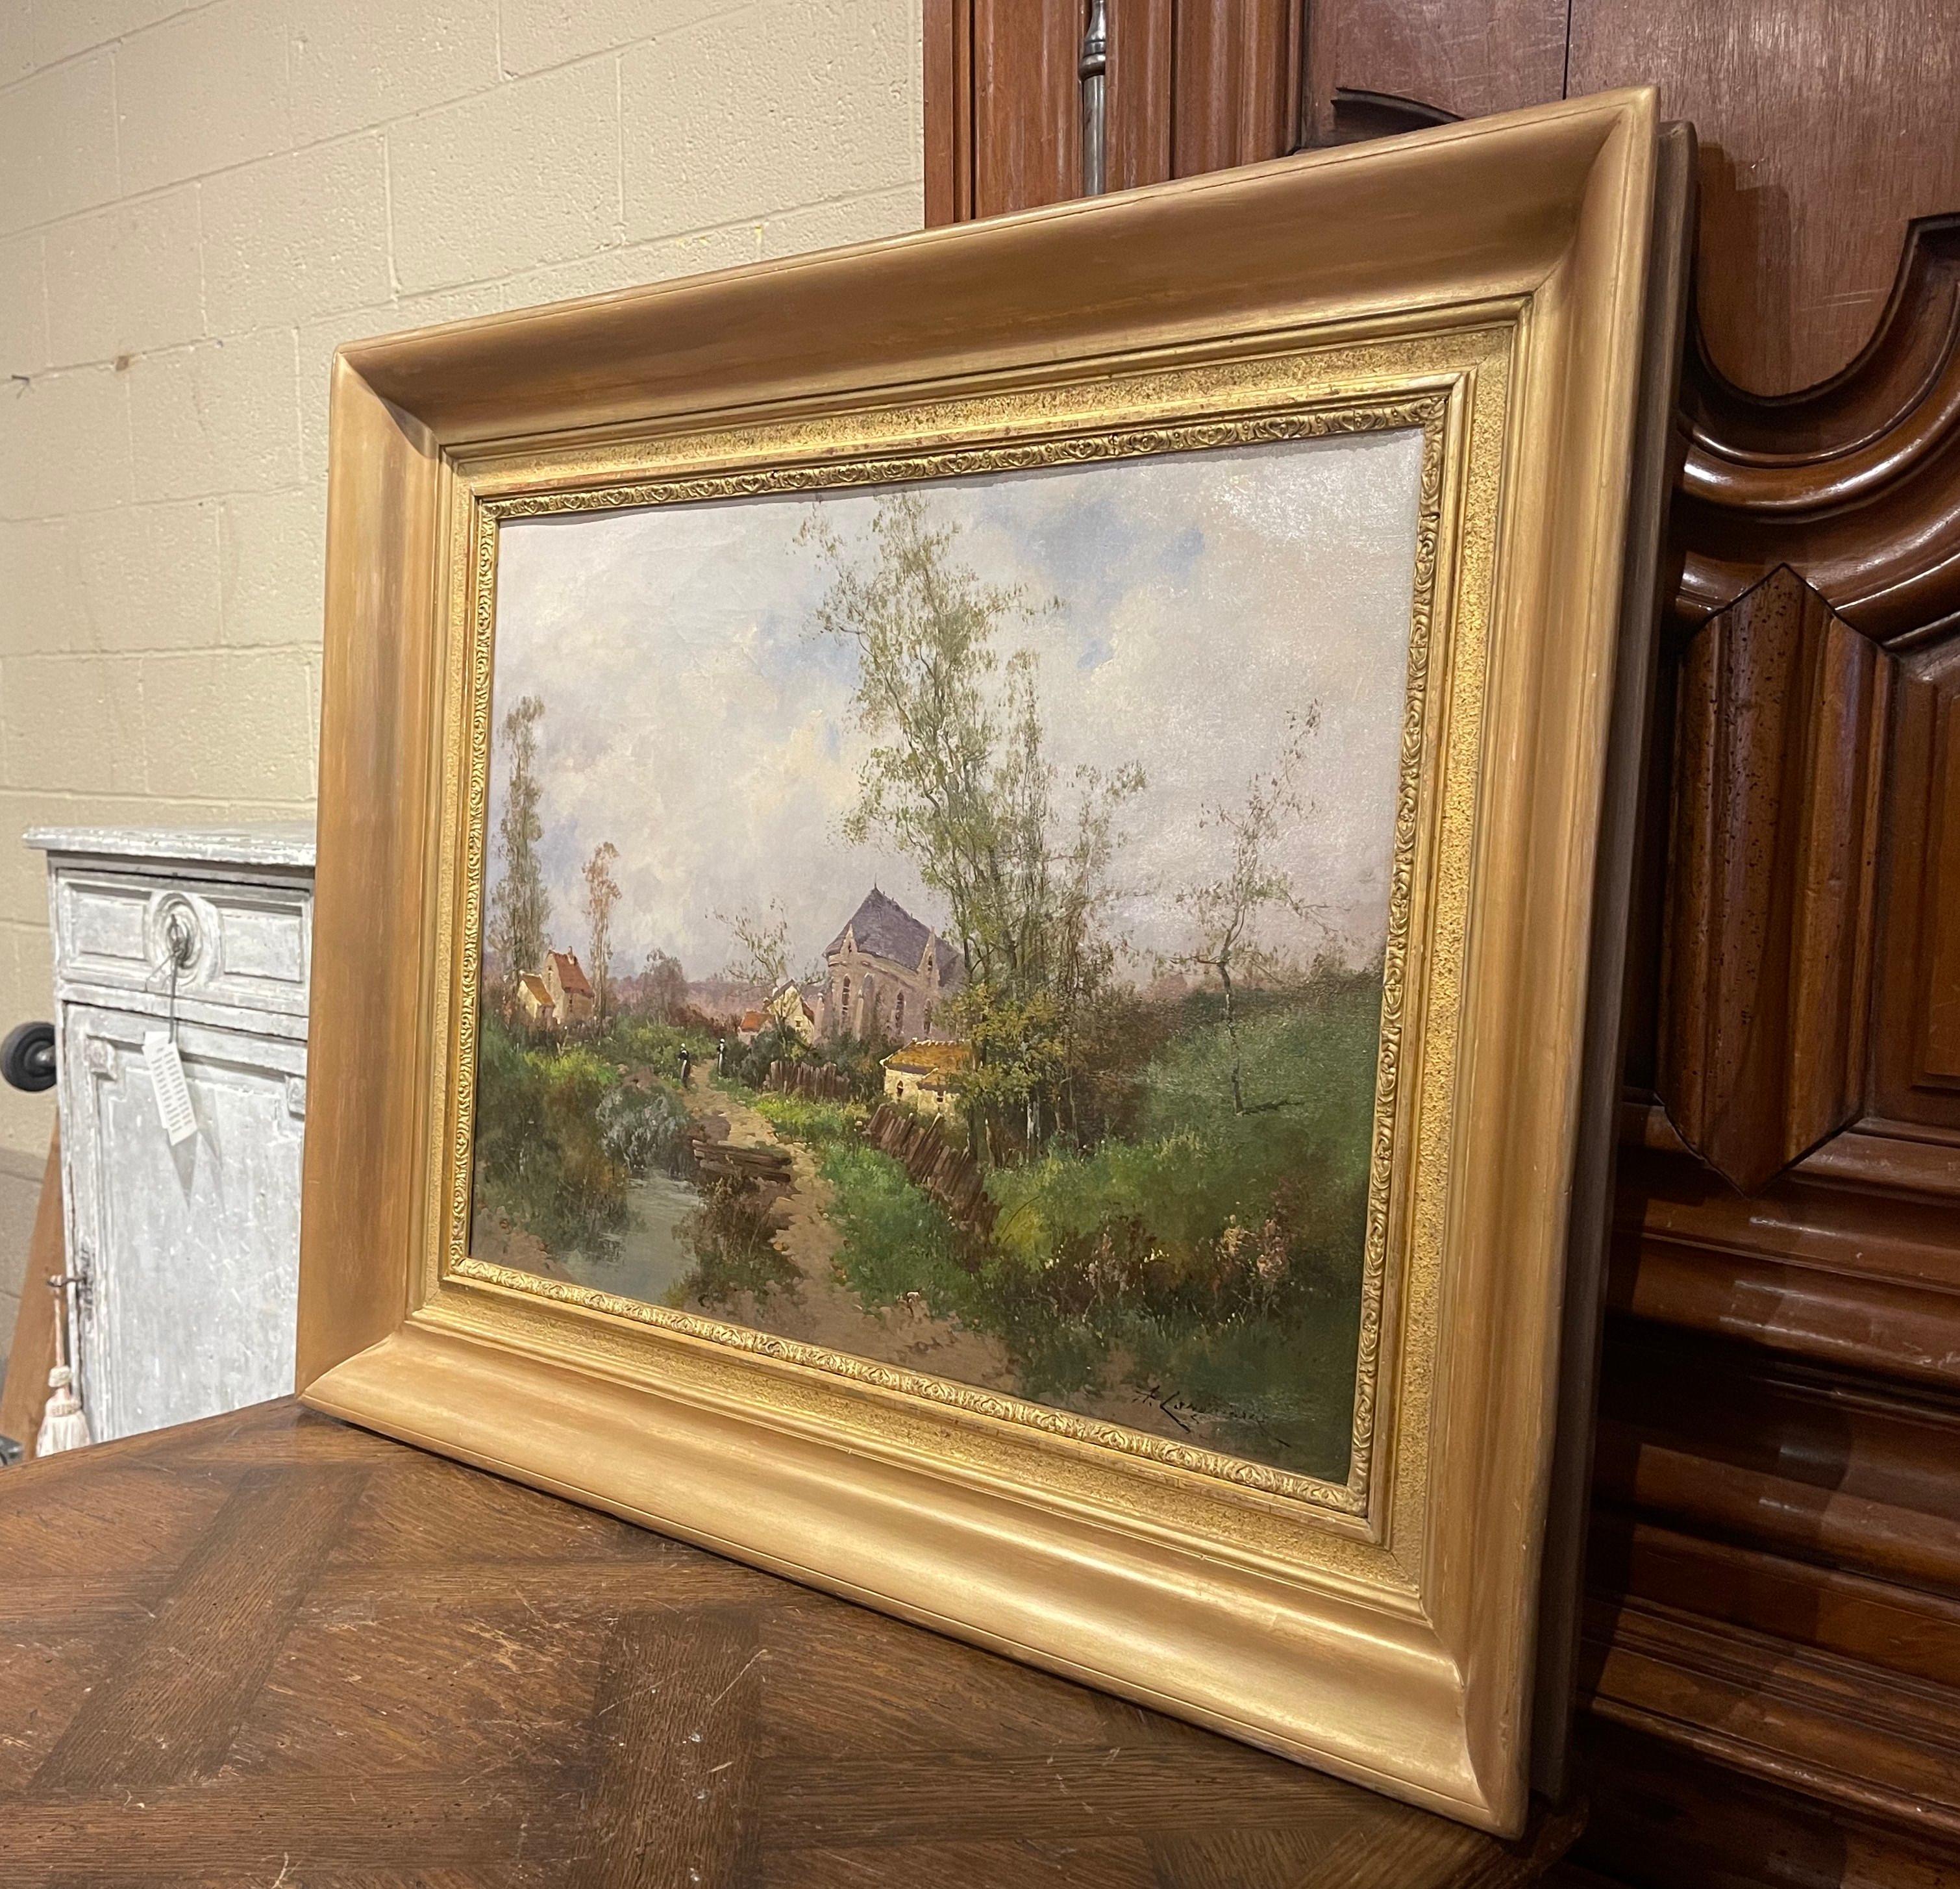 Decorate a study, living room or den with this beautiful and colorful antique painting. Painted in France, circa 1890, the large artwork on canvas is set in a carved Giltwood frame and illustrates a picturesque, countryside scene in rural France